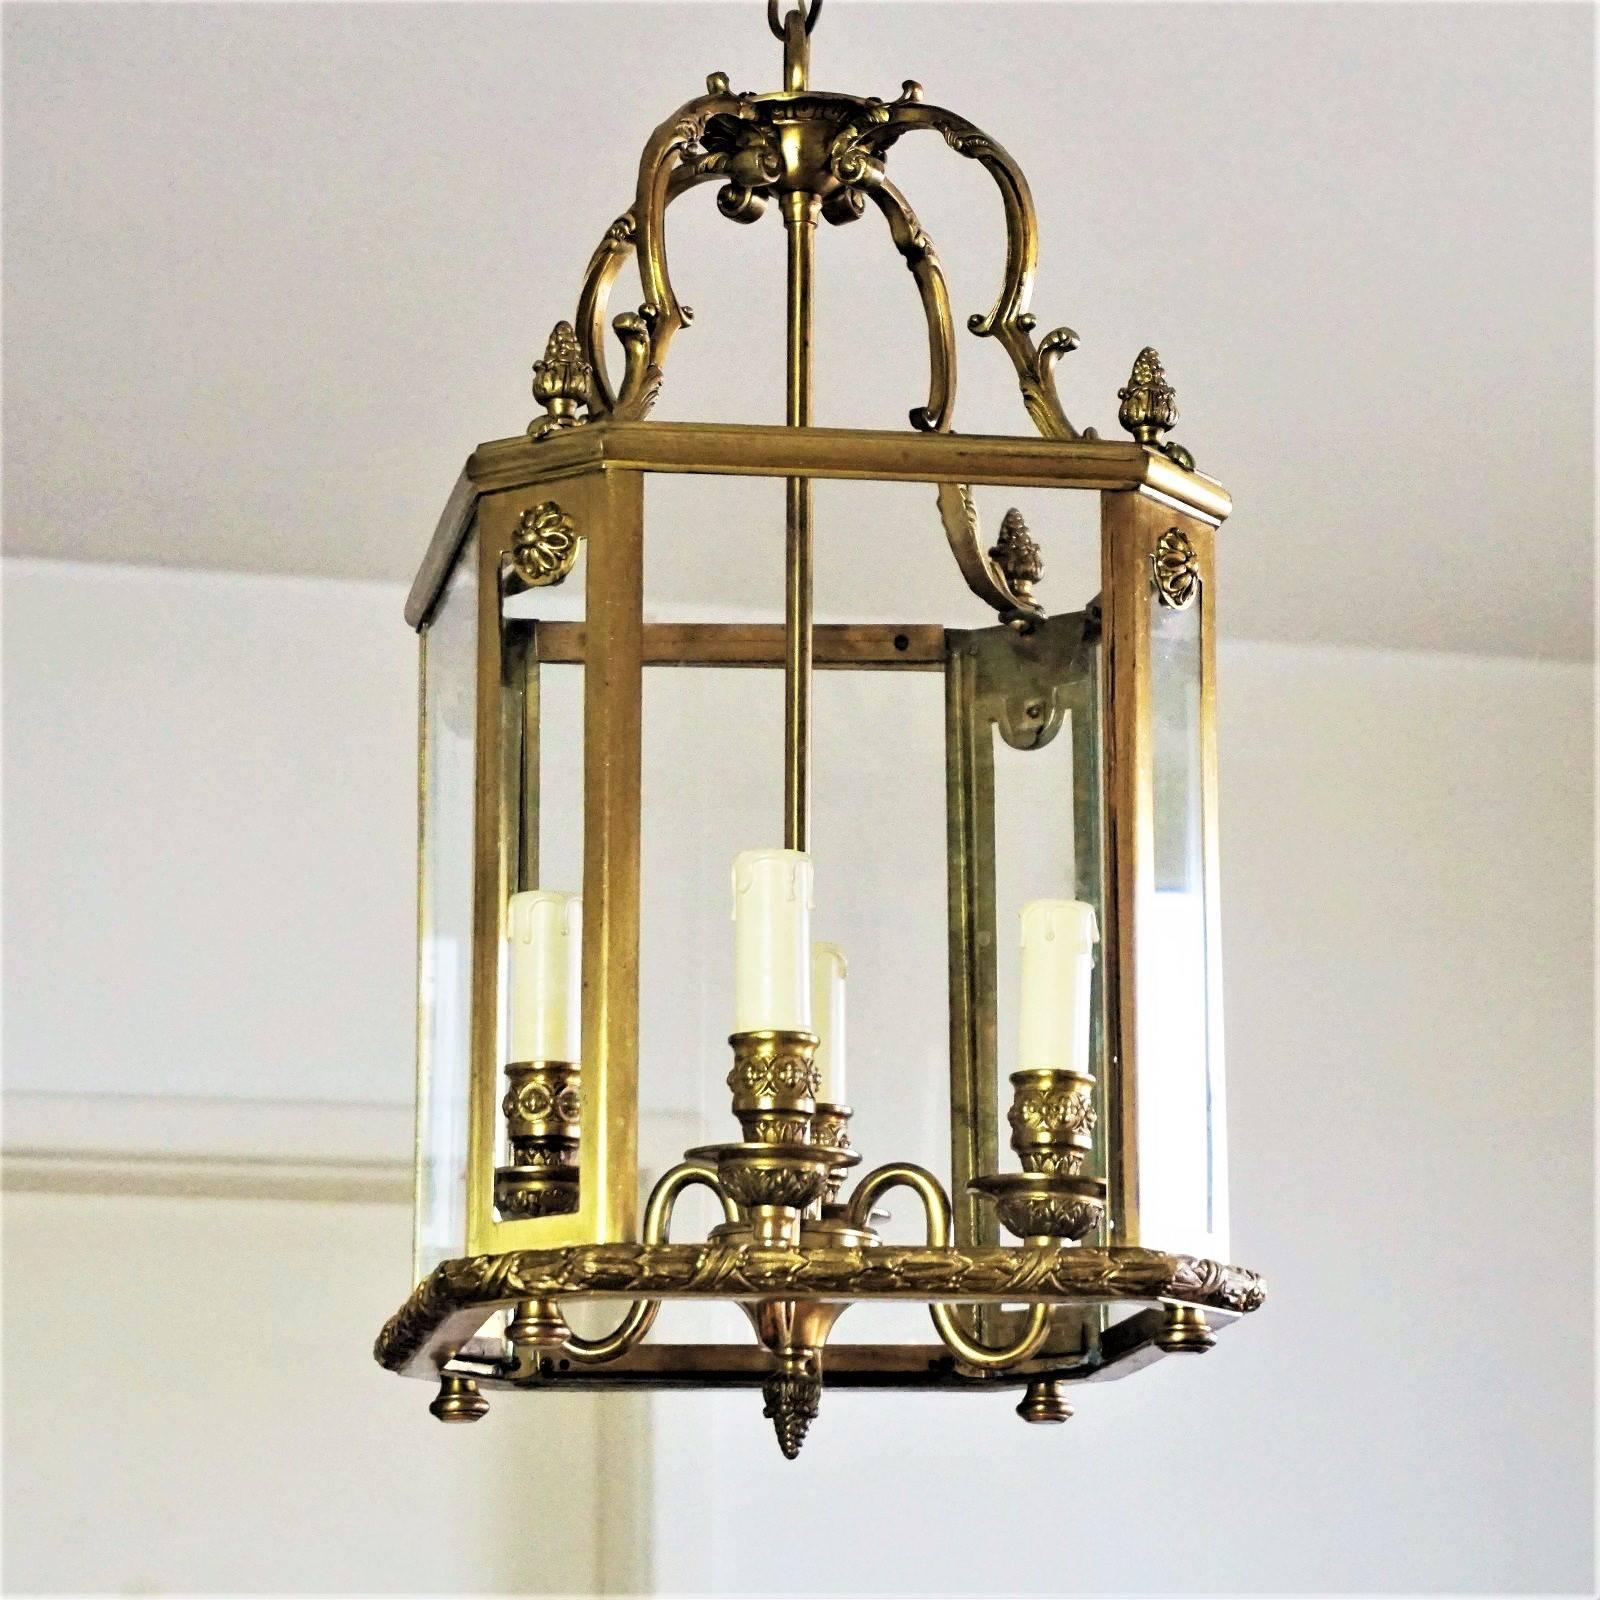 Large French Art Deco brass four-light lantern with bronze ornaments and eight glass windows, circa 1940.

European wiring: Four candle covers with E14 light sockets

Measures: Total height 42 ½ in / 108 cm
Height without hanging chain 20 ¾ /